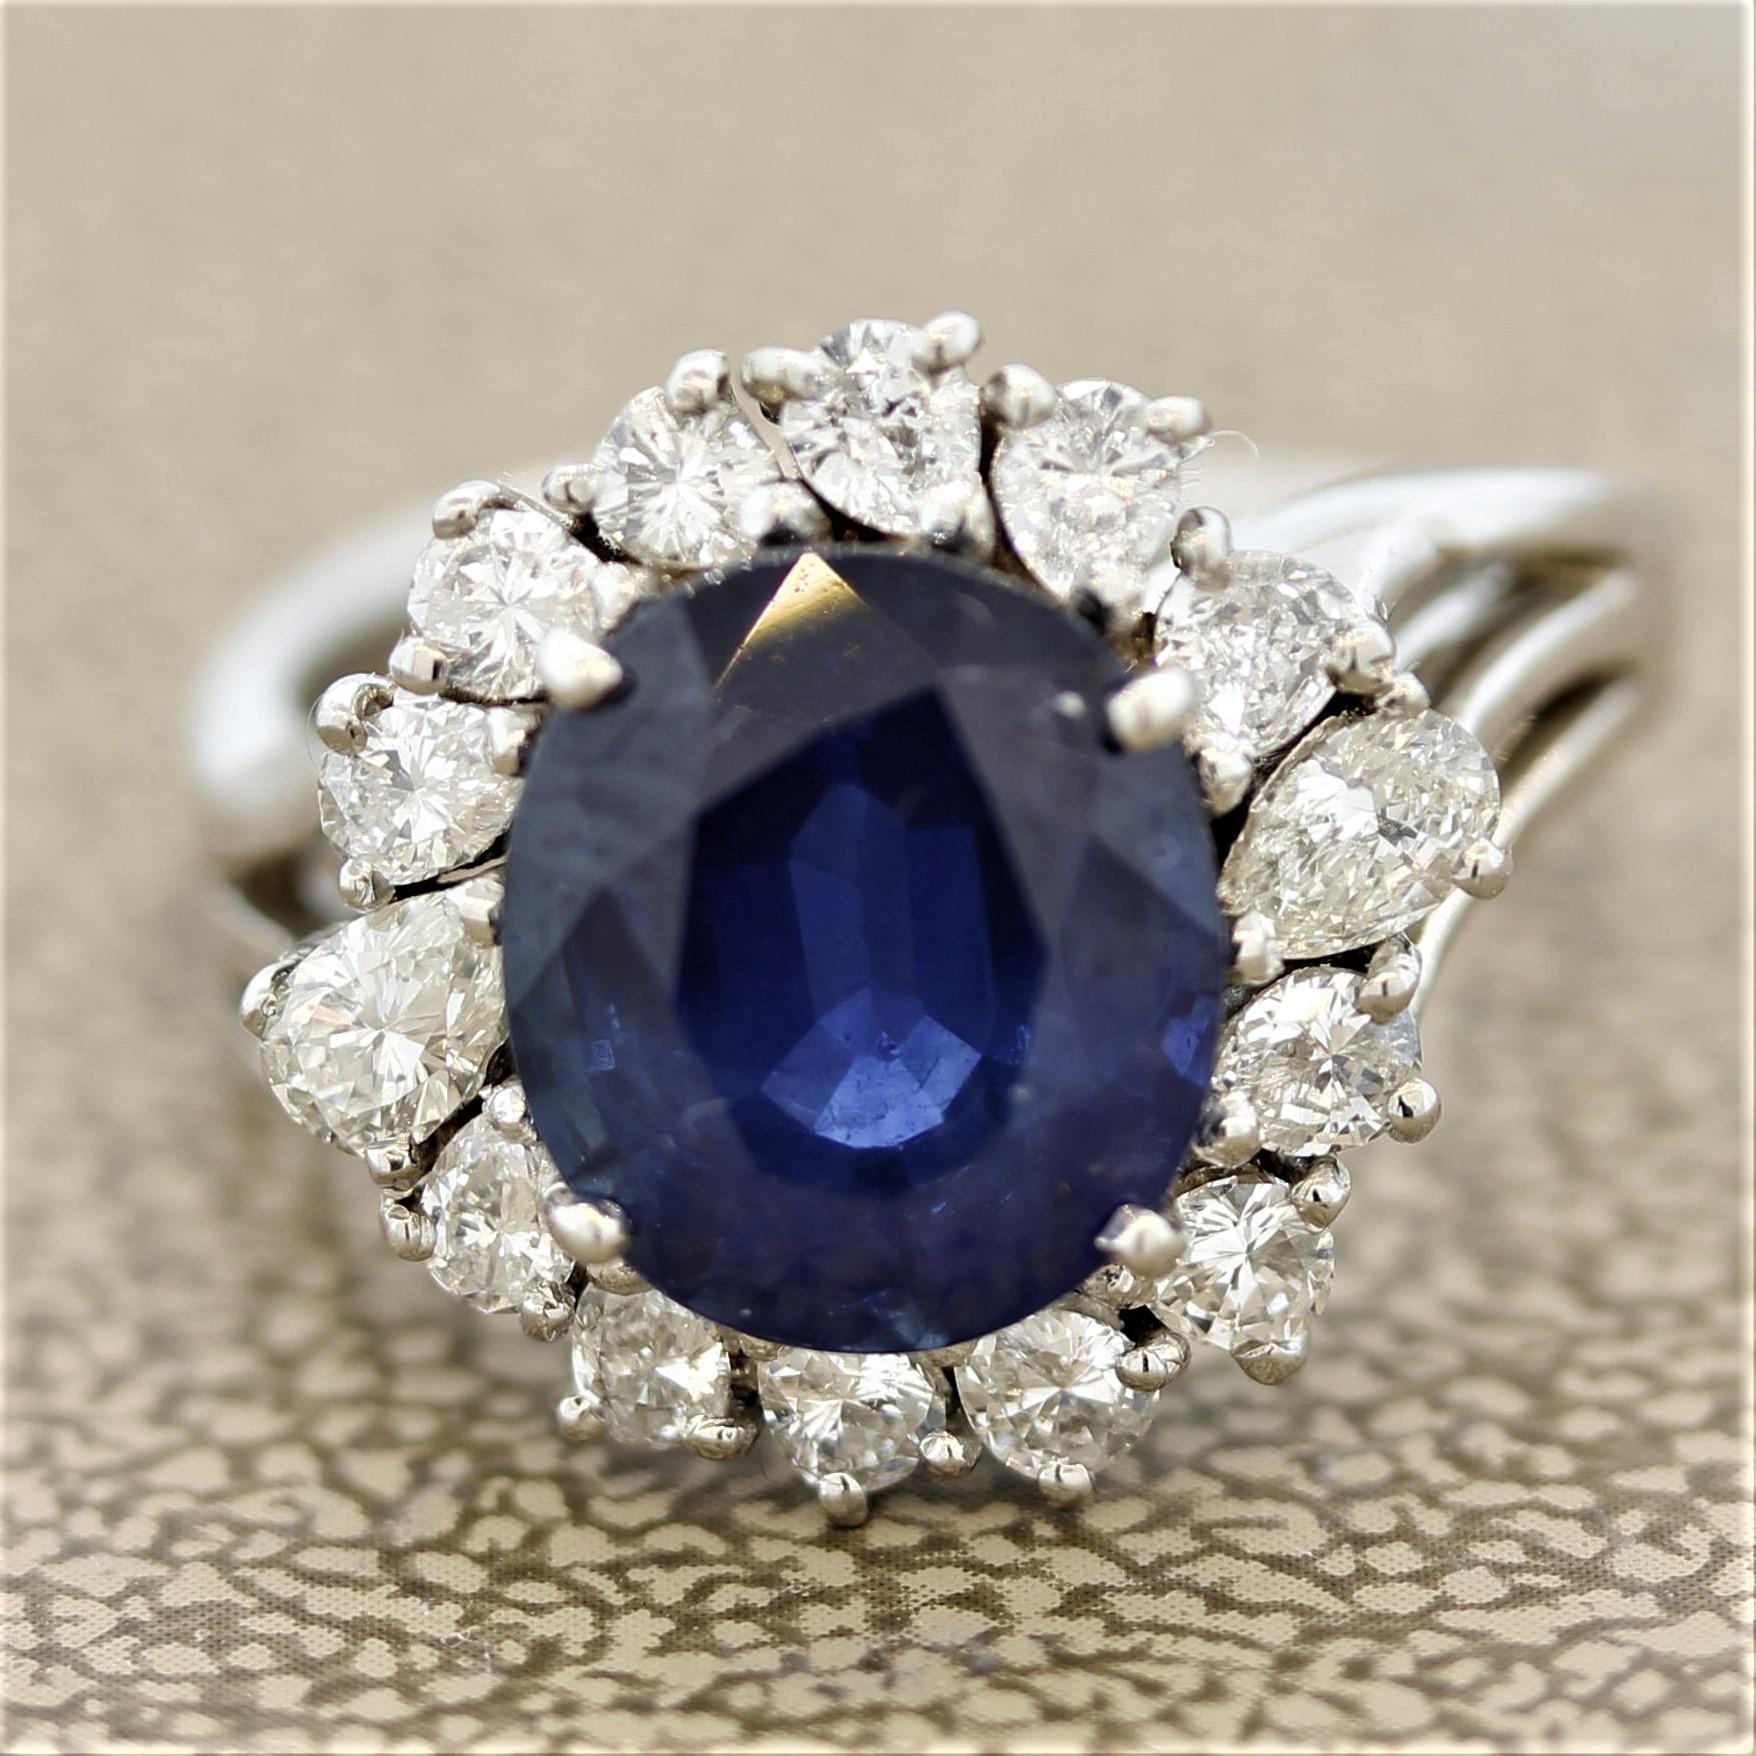 A classic sapphire ring! It features a luscious 3.49 carat oval shaped blue sapphire. It has a sweet blue color and is free of any eye-visible inclusions. It is haloed by 0.75 carats of round brilliant and pear shaped diamonds. Hand-fabricated in